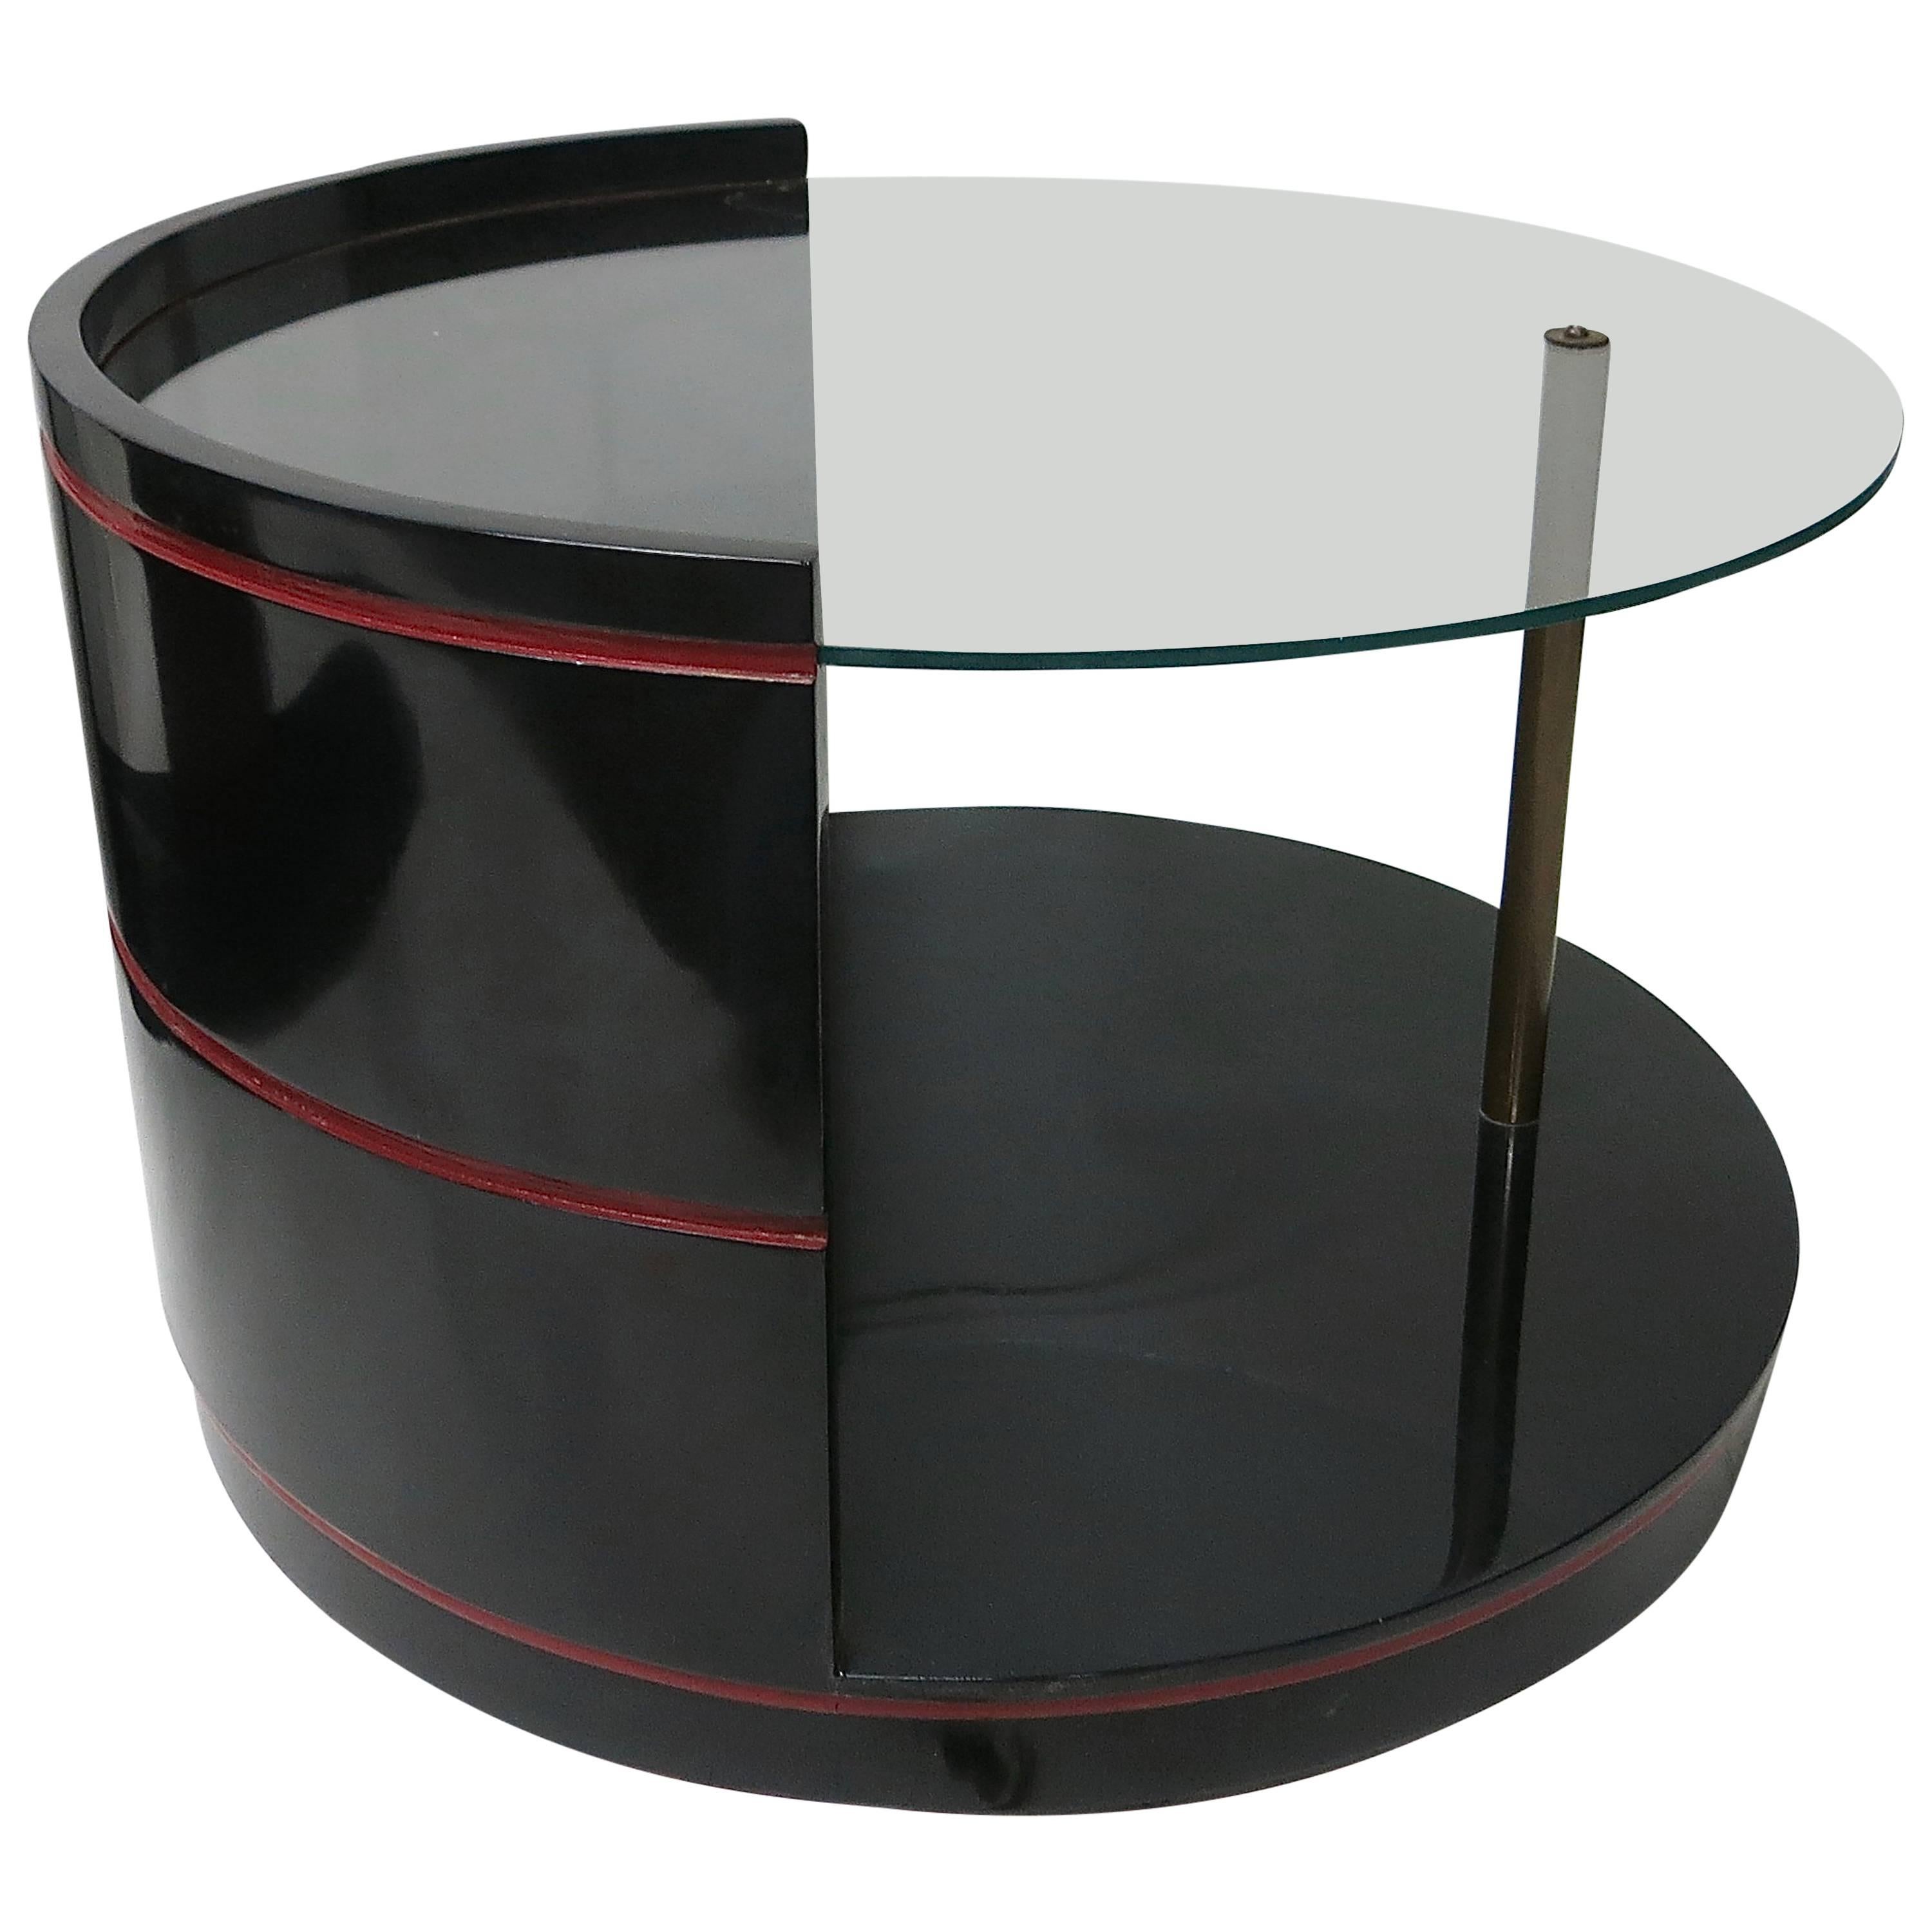 Cocktail / Side Table by Gilbert Rohde for Herman Miller Circa 1935, American